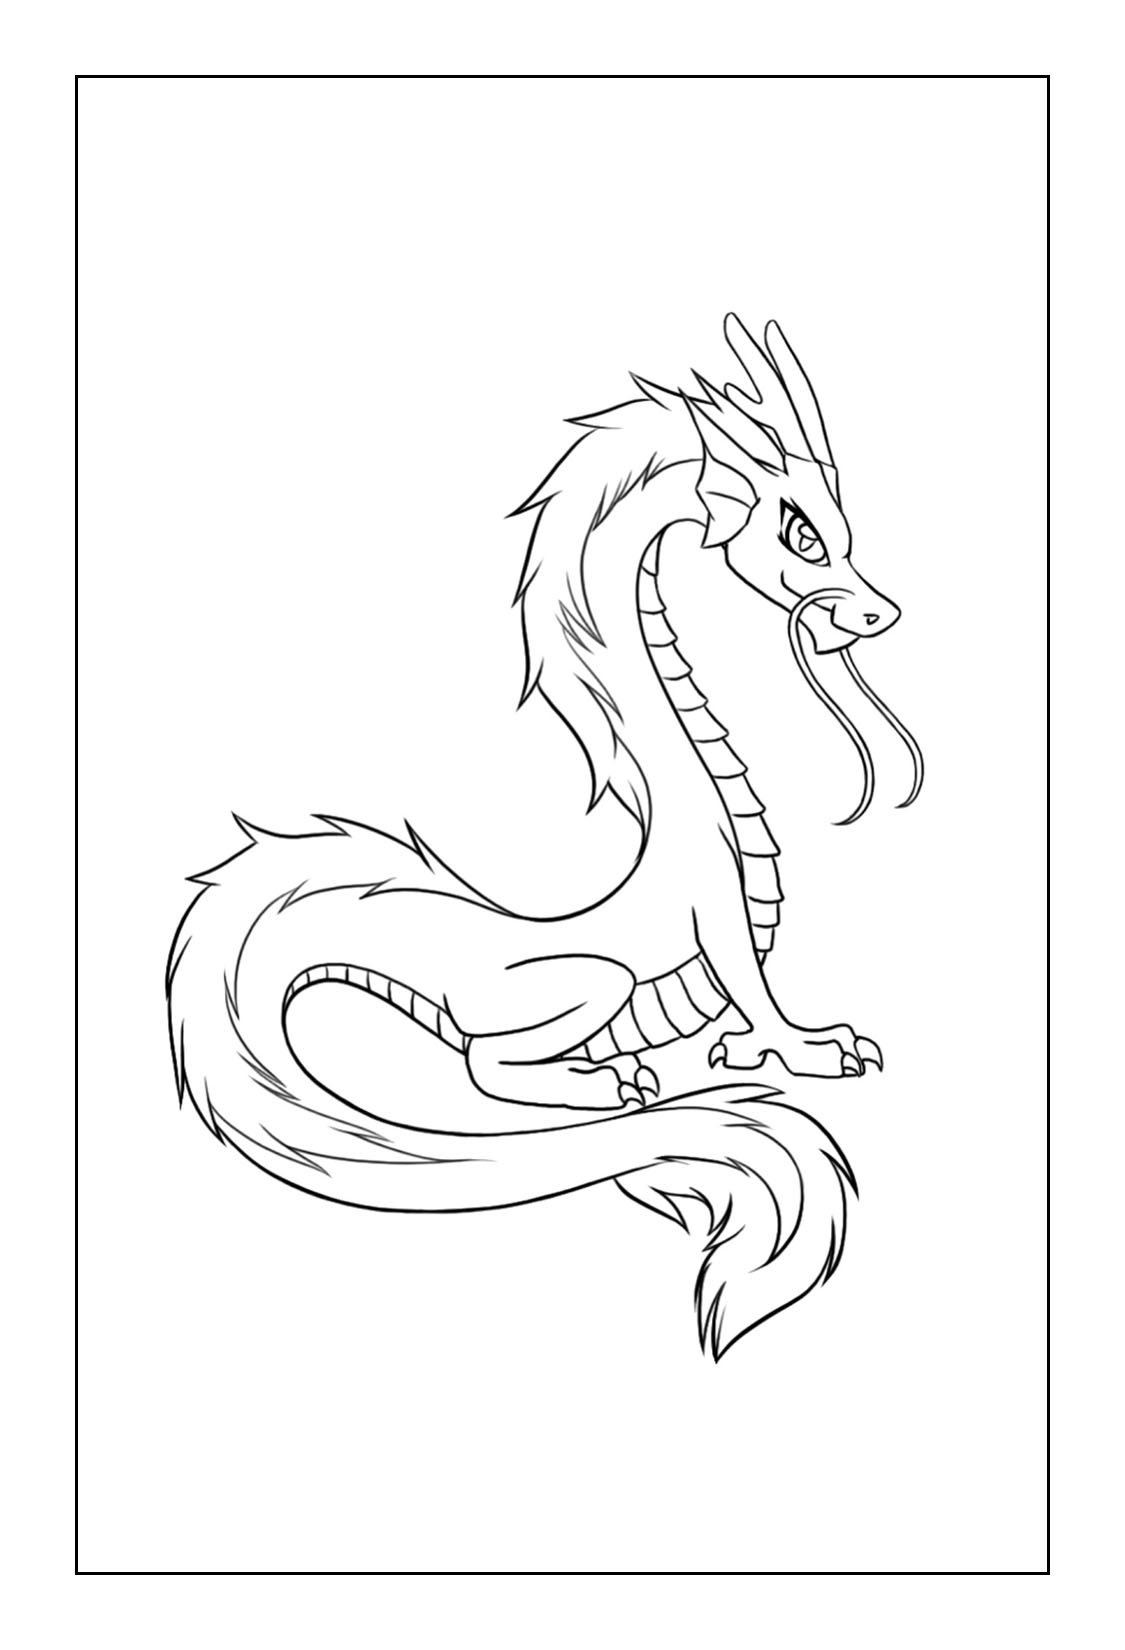 Dragon Coloring Pages – coloring.rocks!